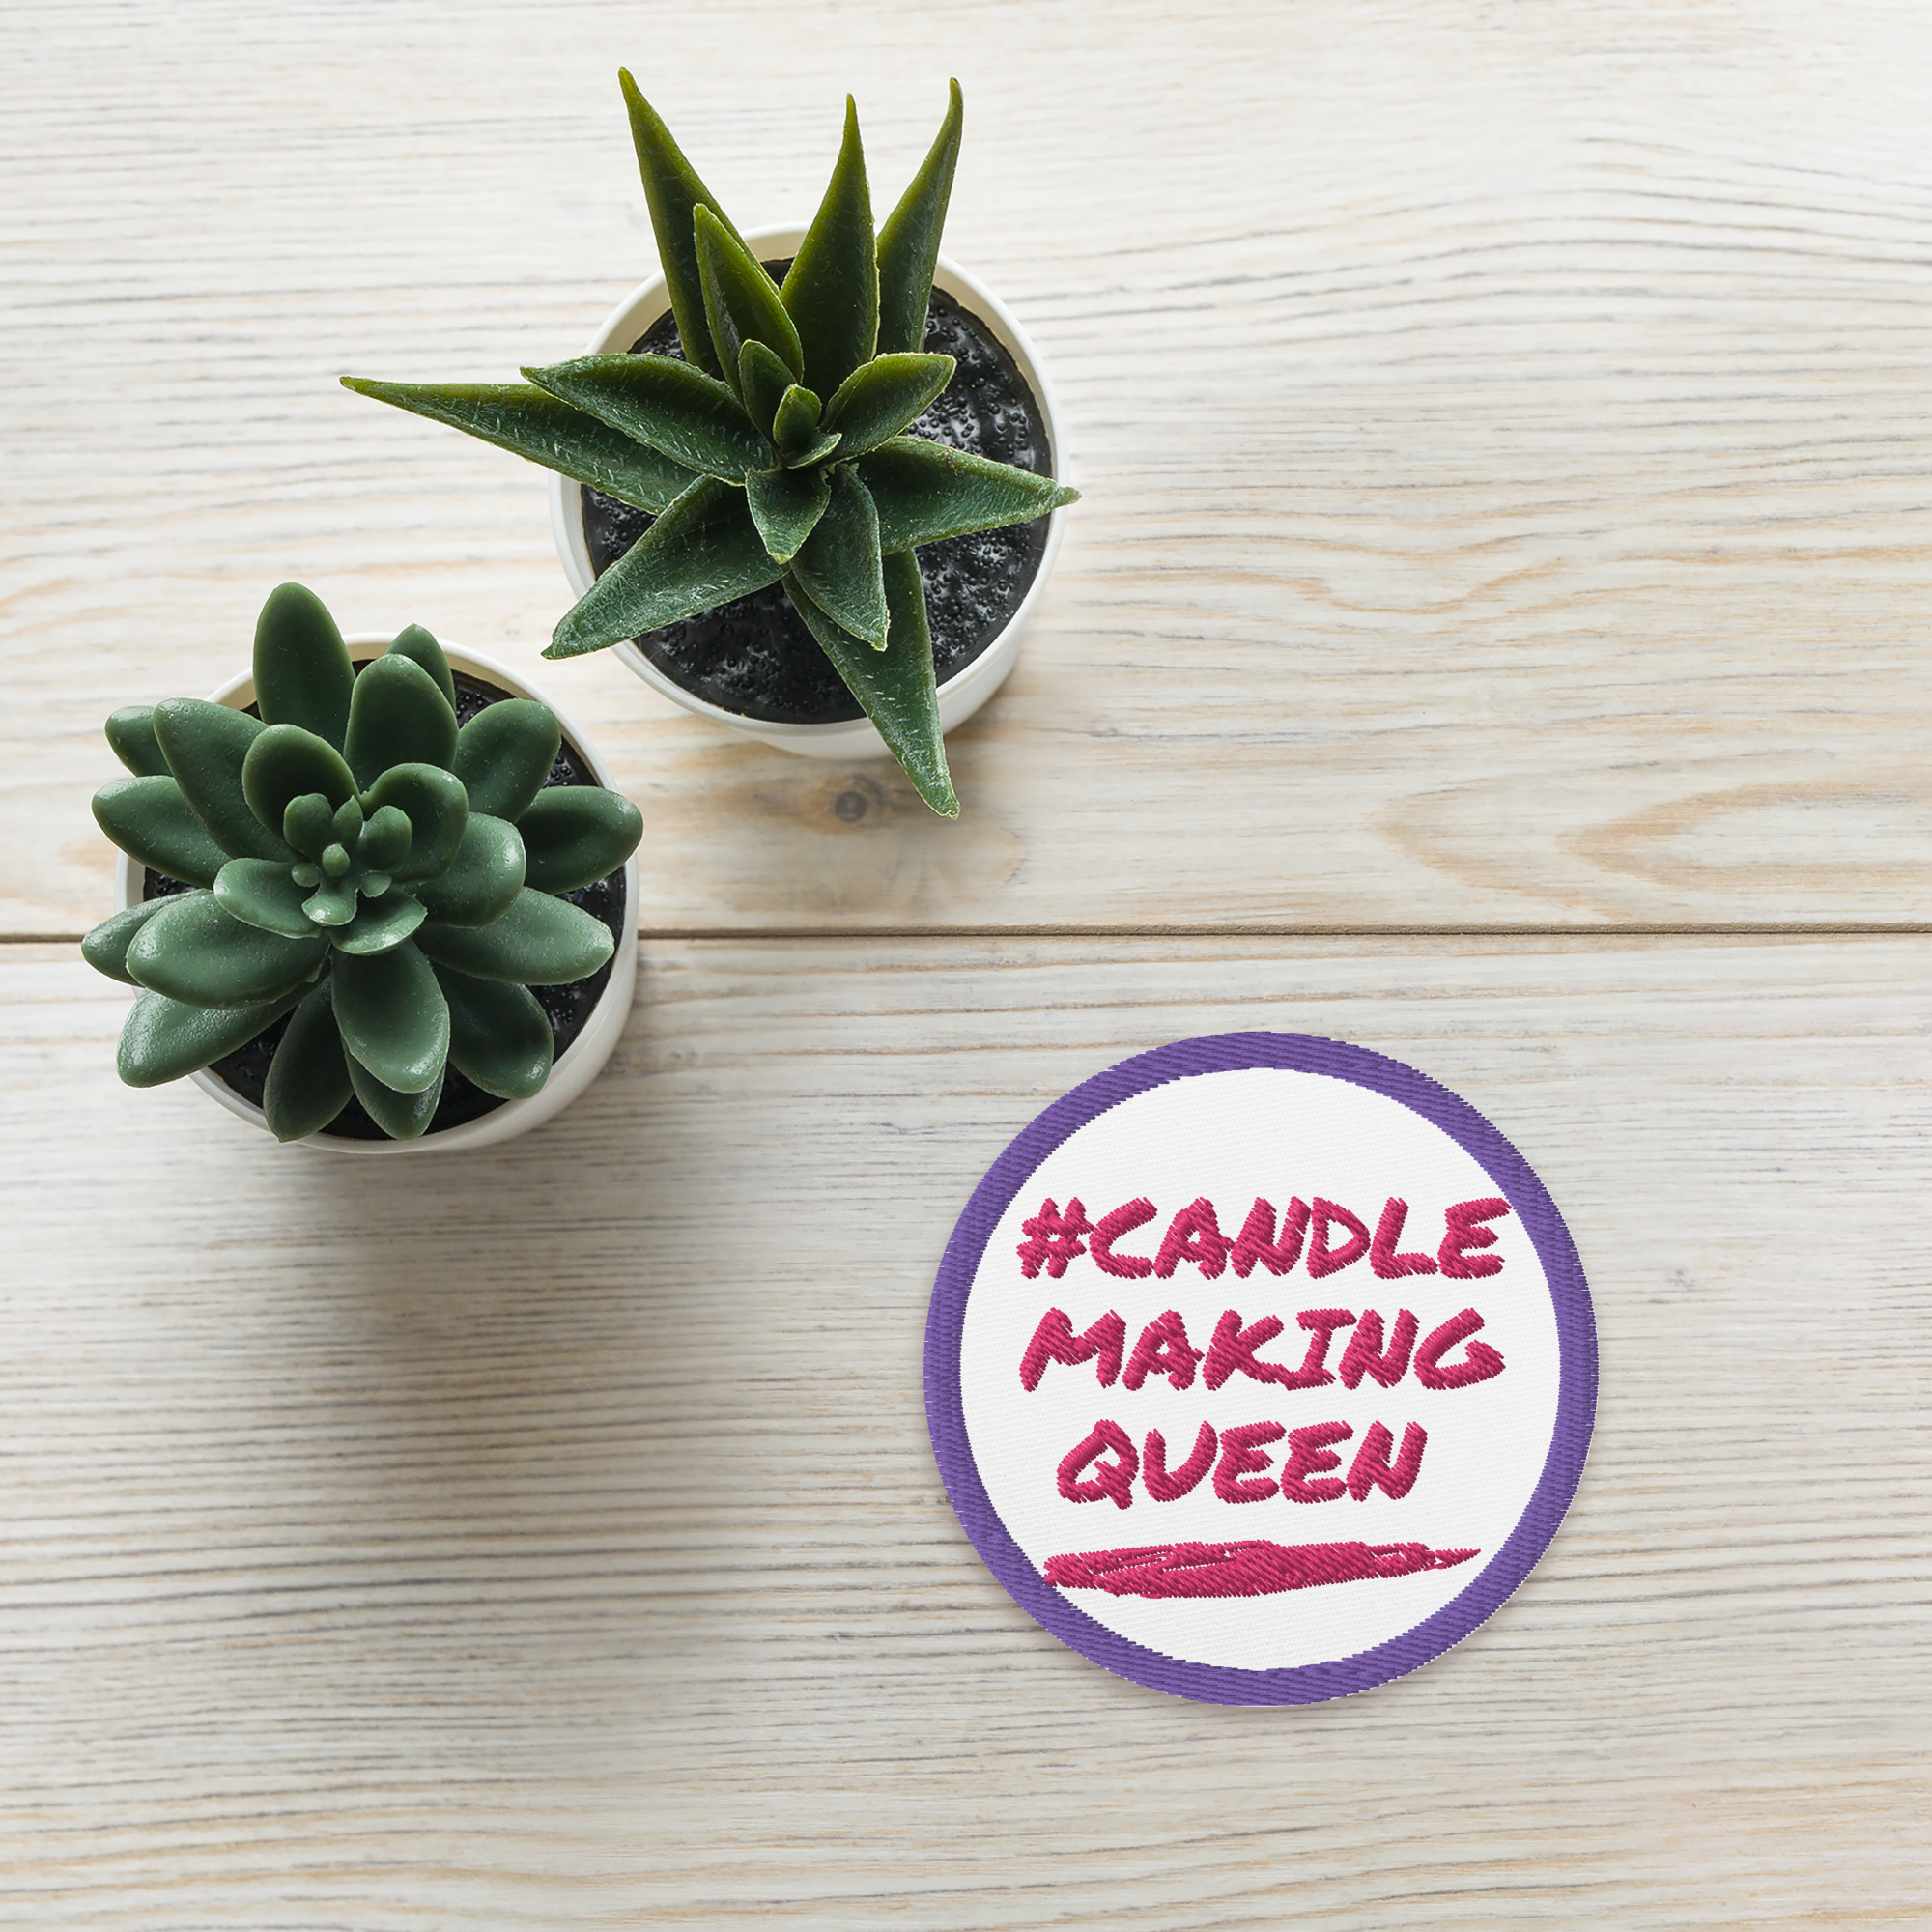 Embroidered patch - Candle Making Queen